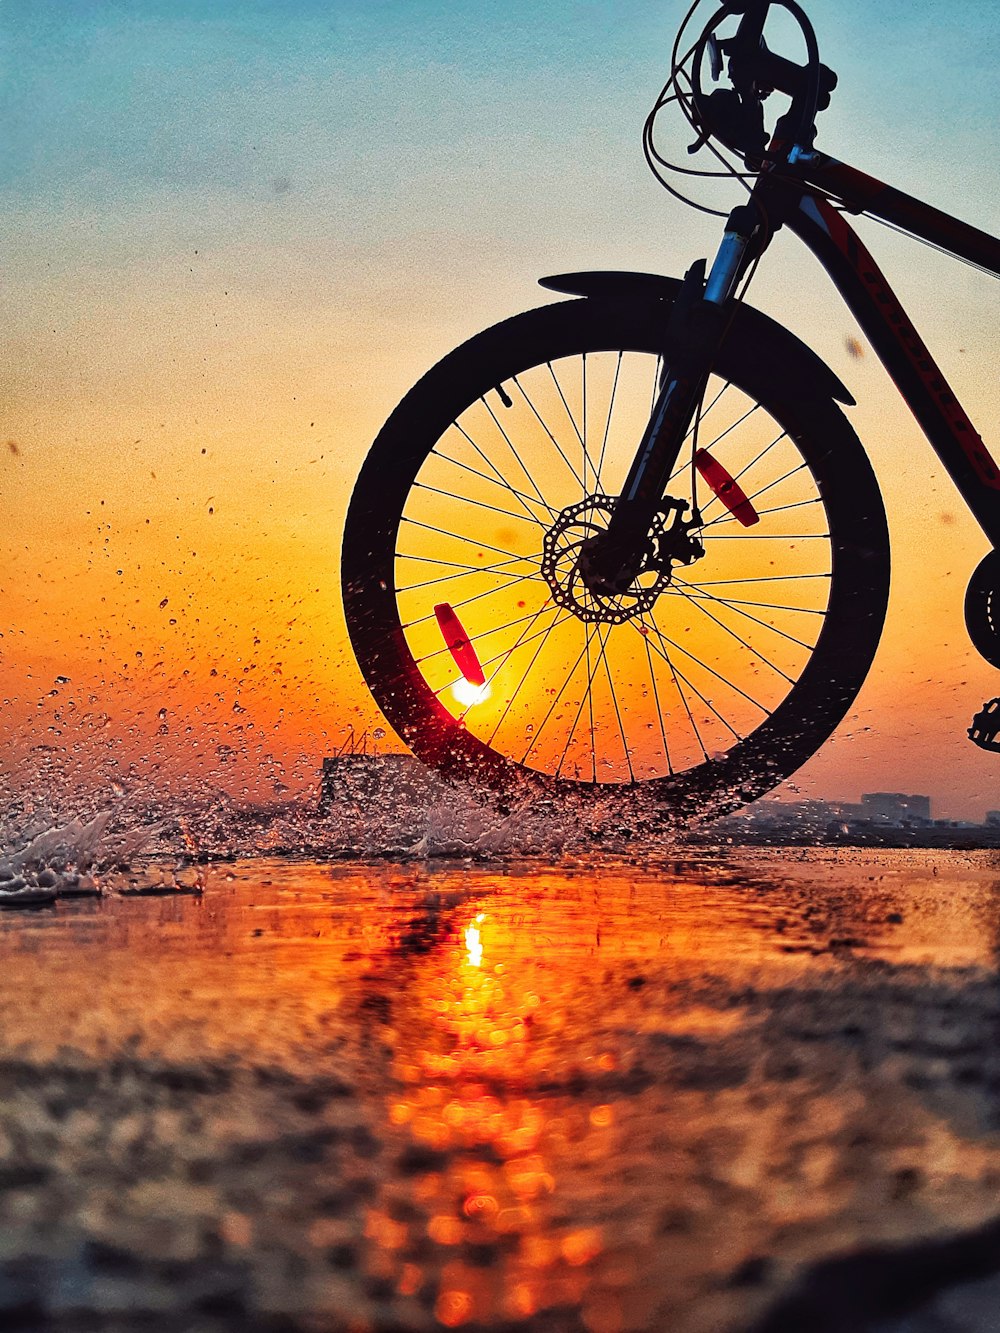 black bicycle on brown sand during sunset